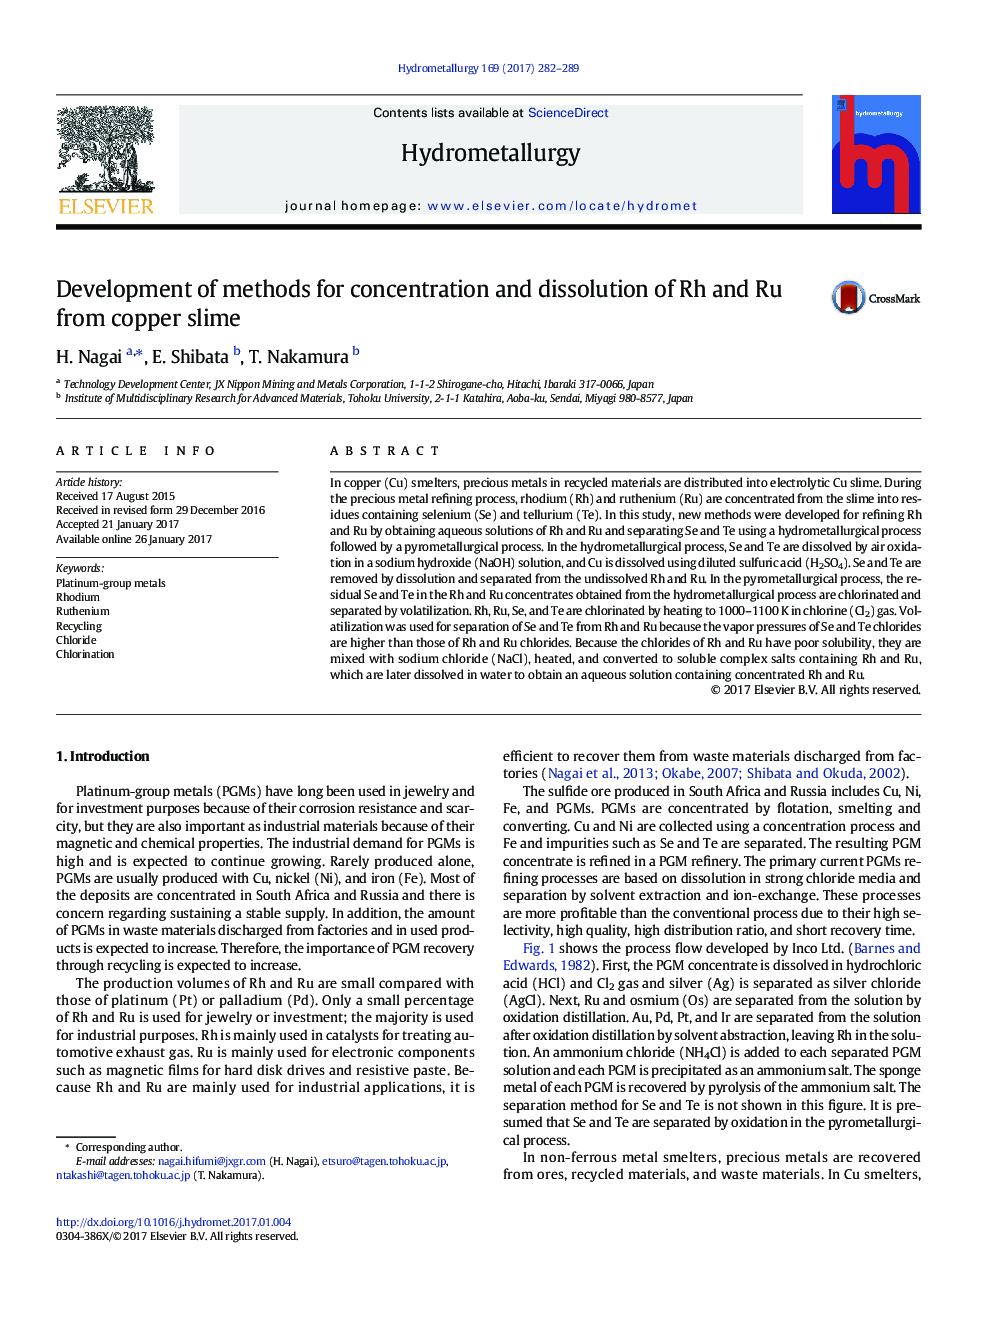 Development of methods for concentration and dissolution of Rh and Ru from copper slime